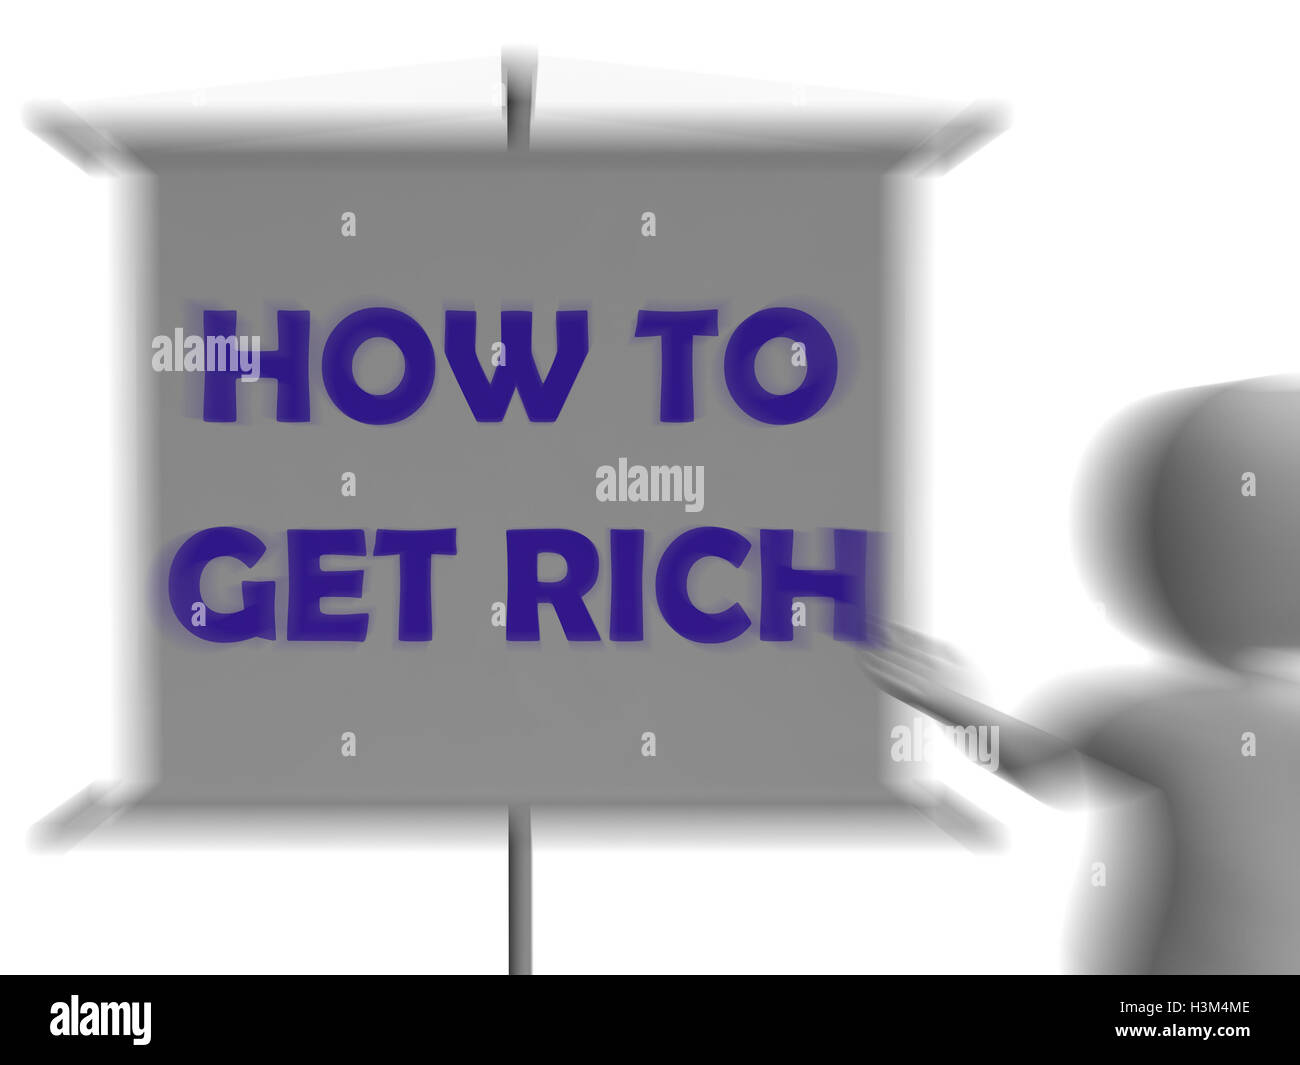 How To Get Rich Board Displays Wealth Improvement Stock Photo